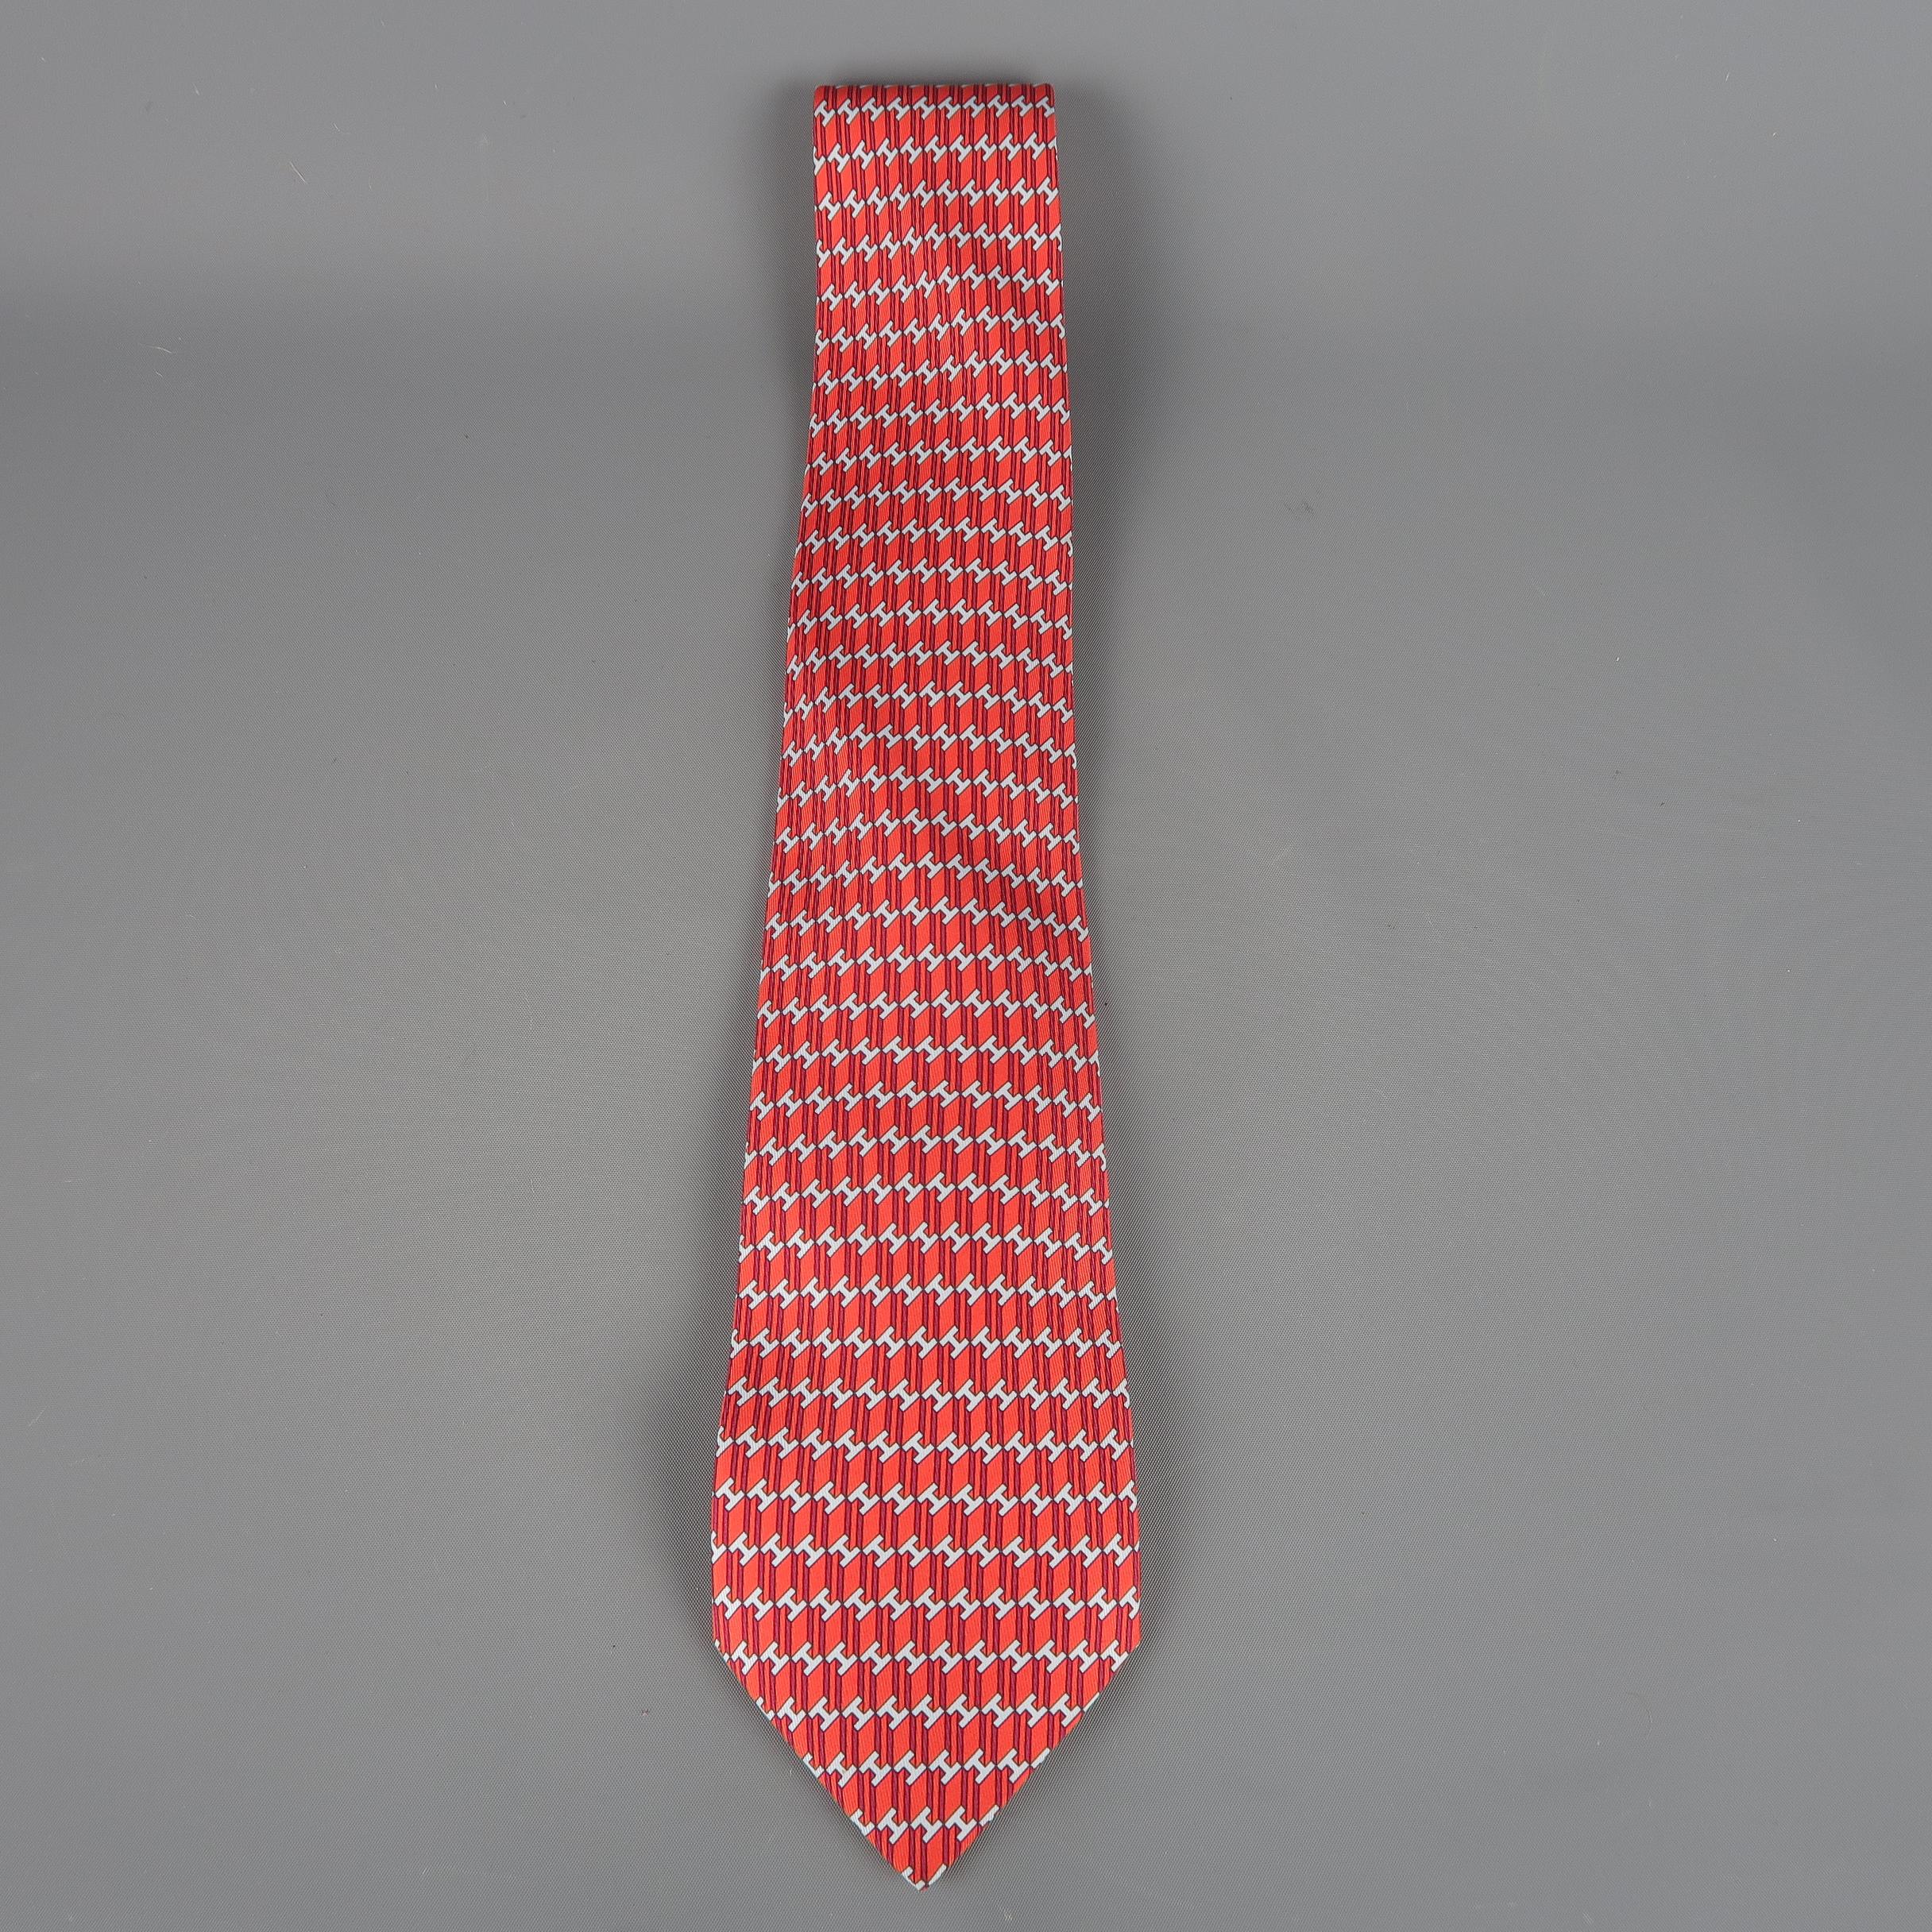 HERMES tie comes in red striped silk twill with an all over gray H print. Made in France.
 
Excellent Pre-Owned Condition.
 
Width: 3.5 in.